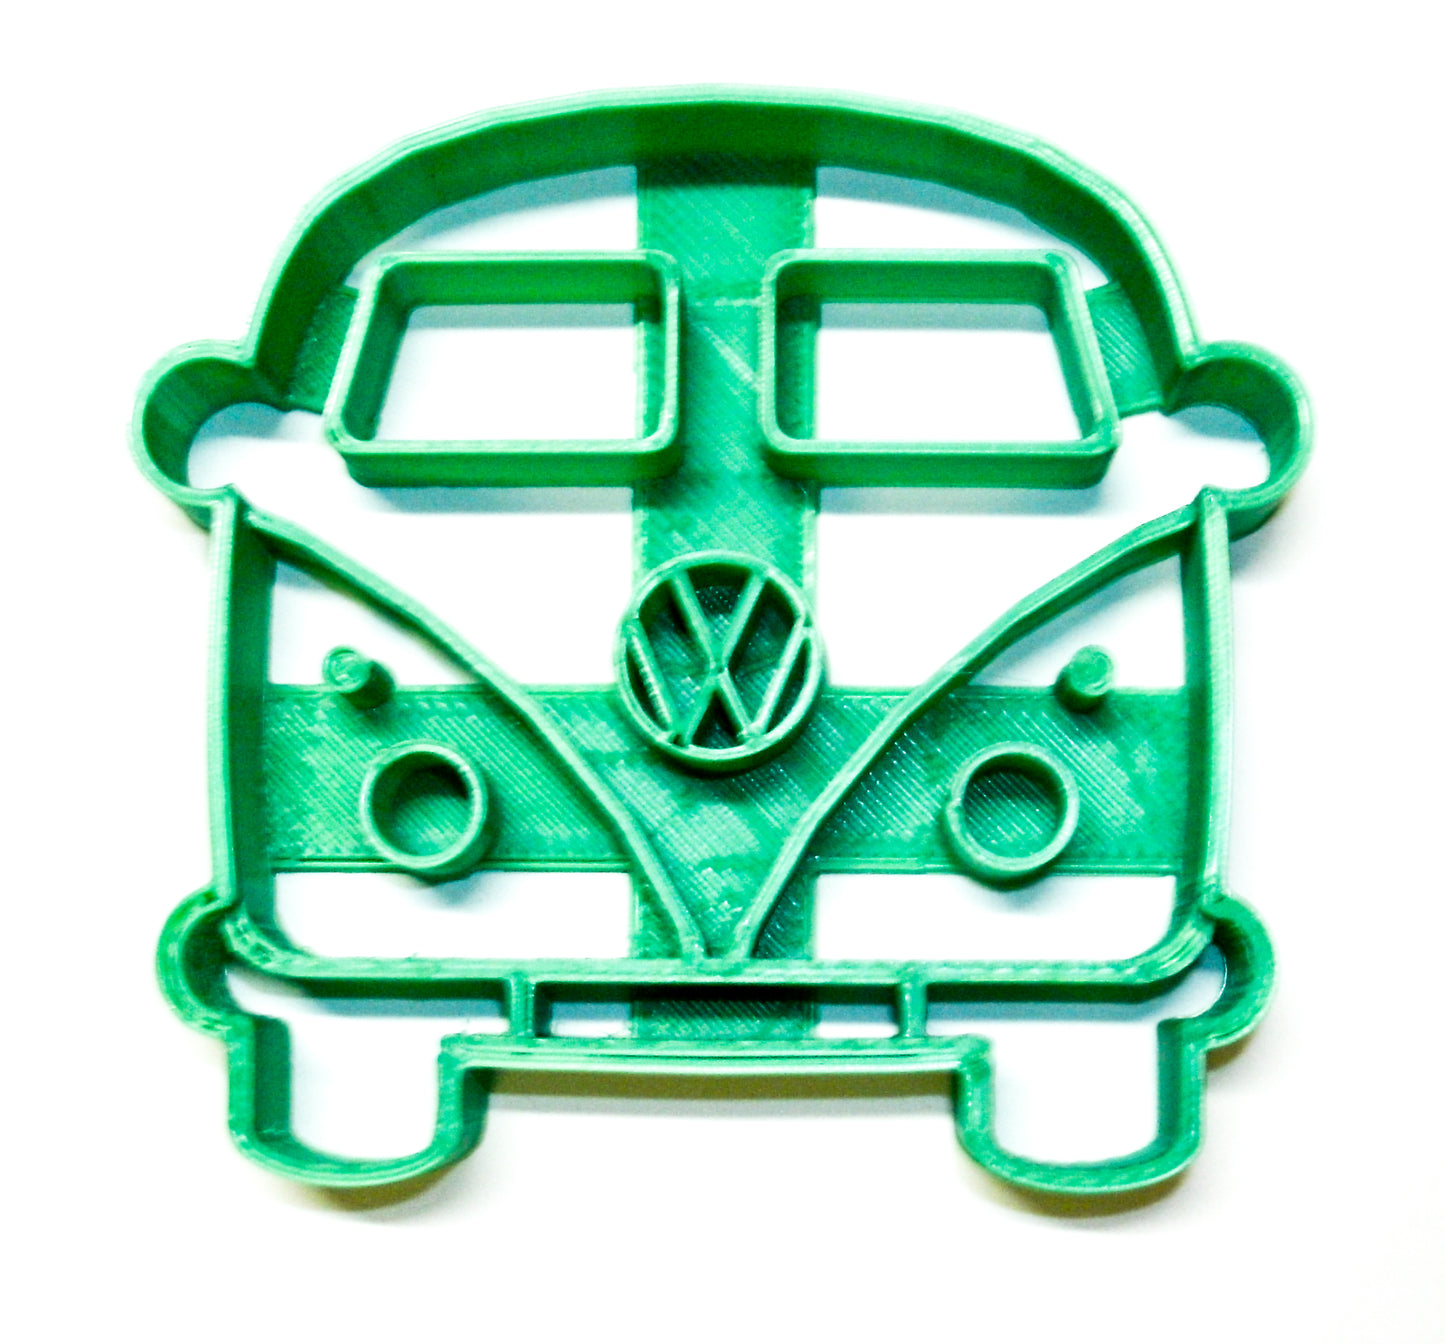 VW Style Van Bus Microbus Front View Vintage Cookie Cutter Made in USA PR2161